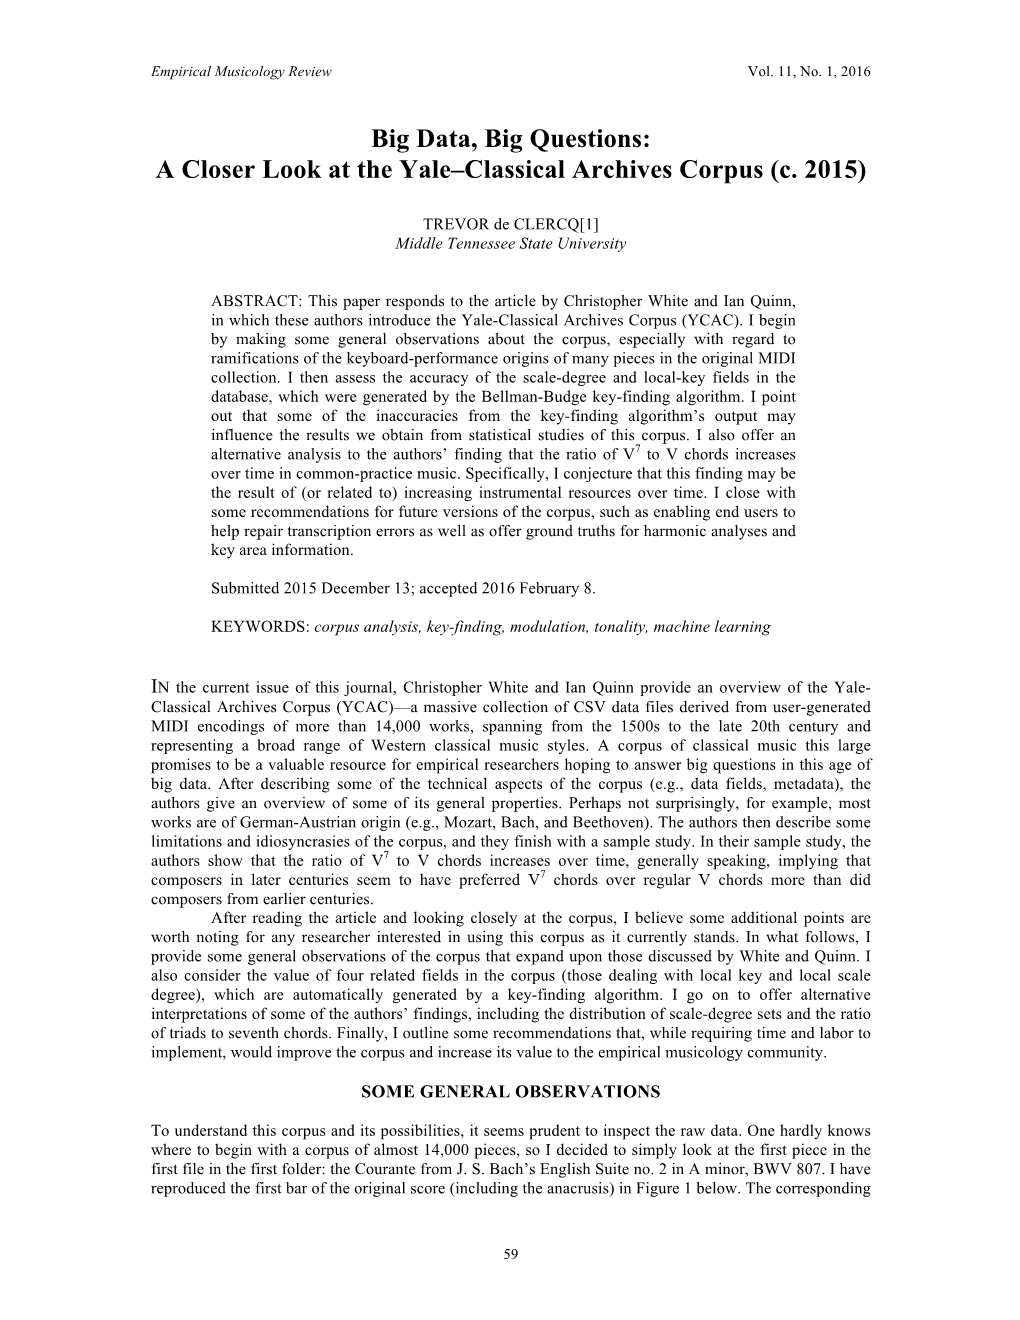 A Closer Look at the Yale–Classical Archives Corpus (C